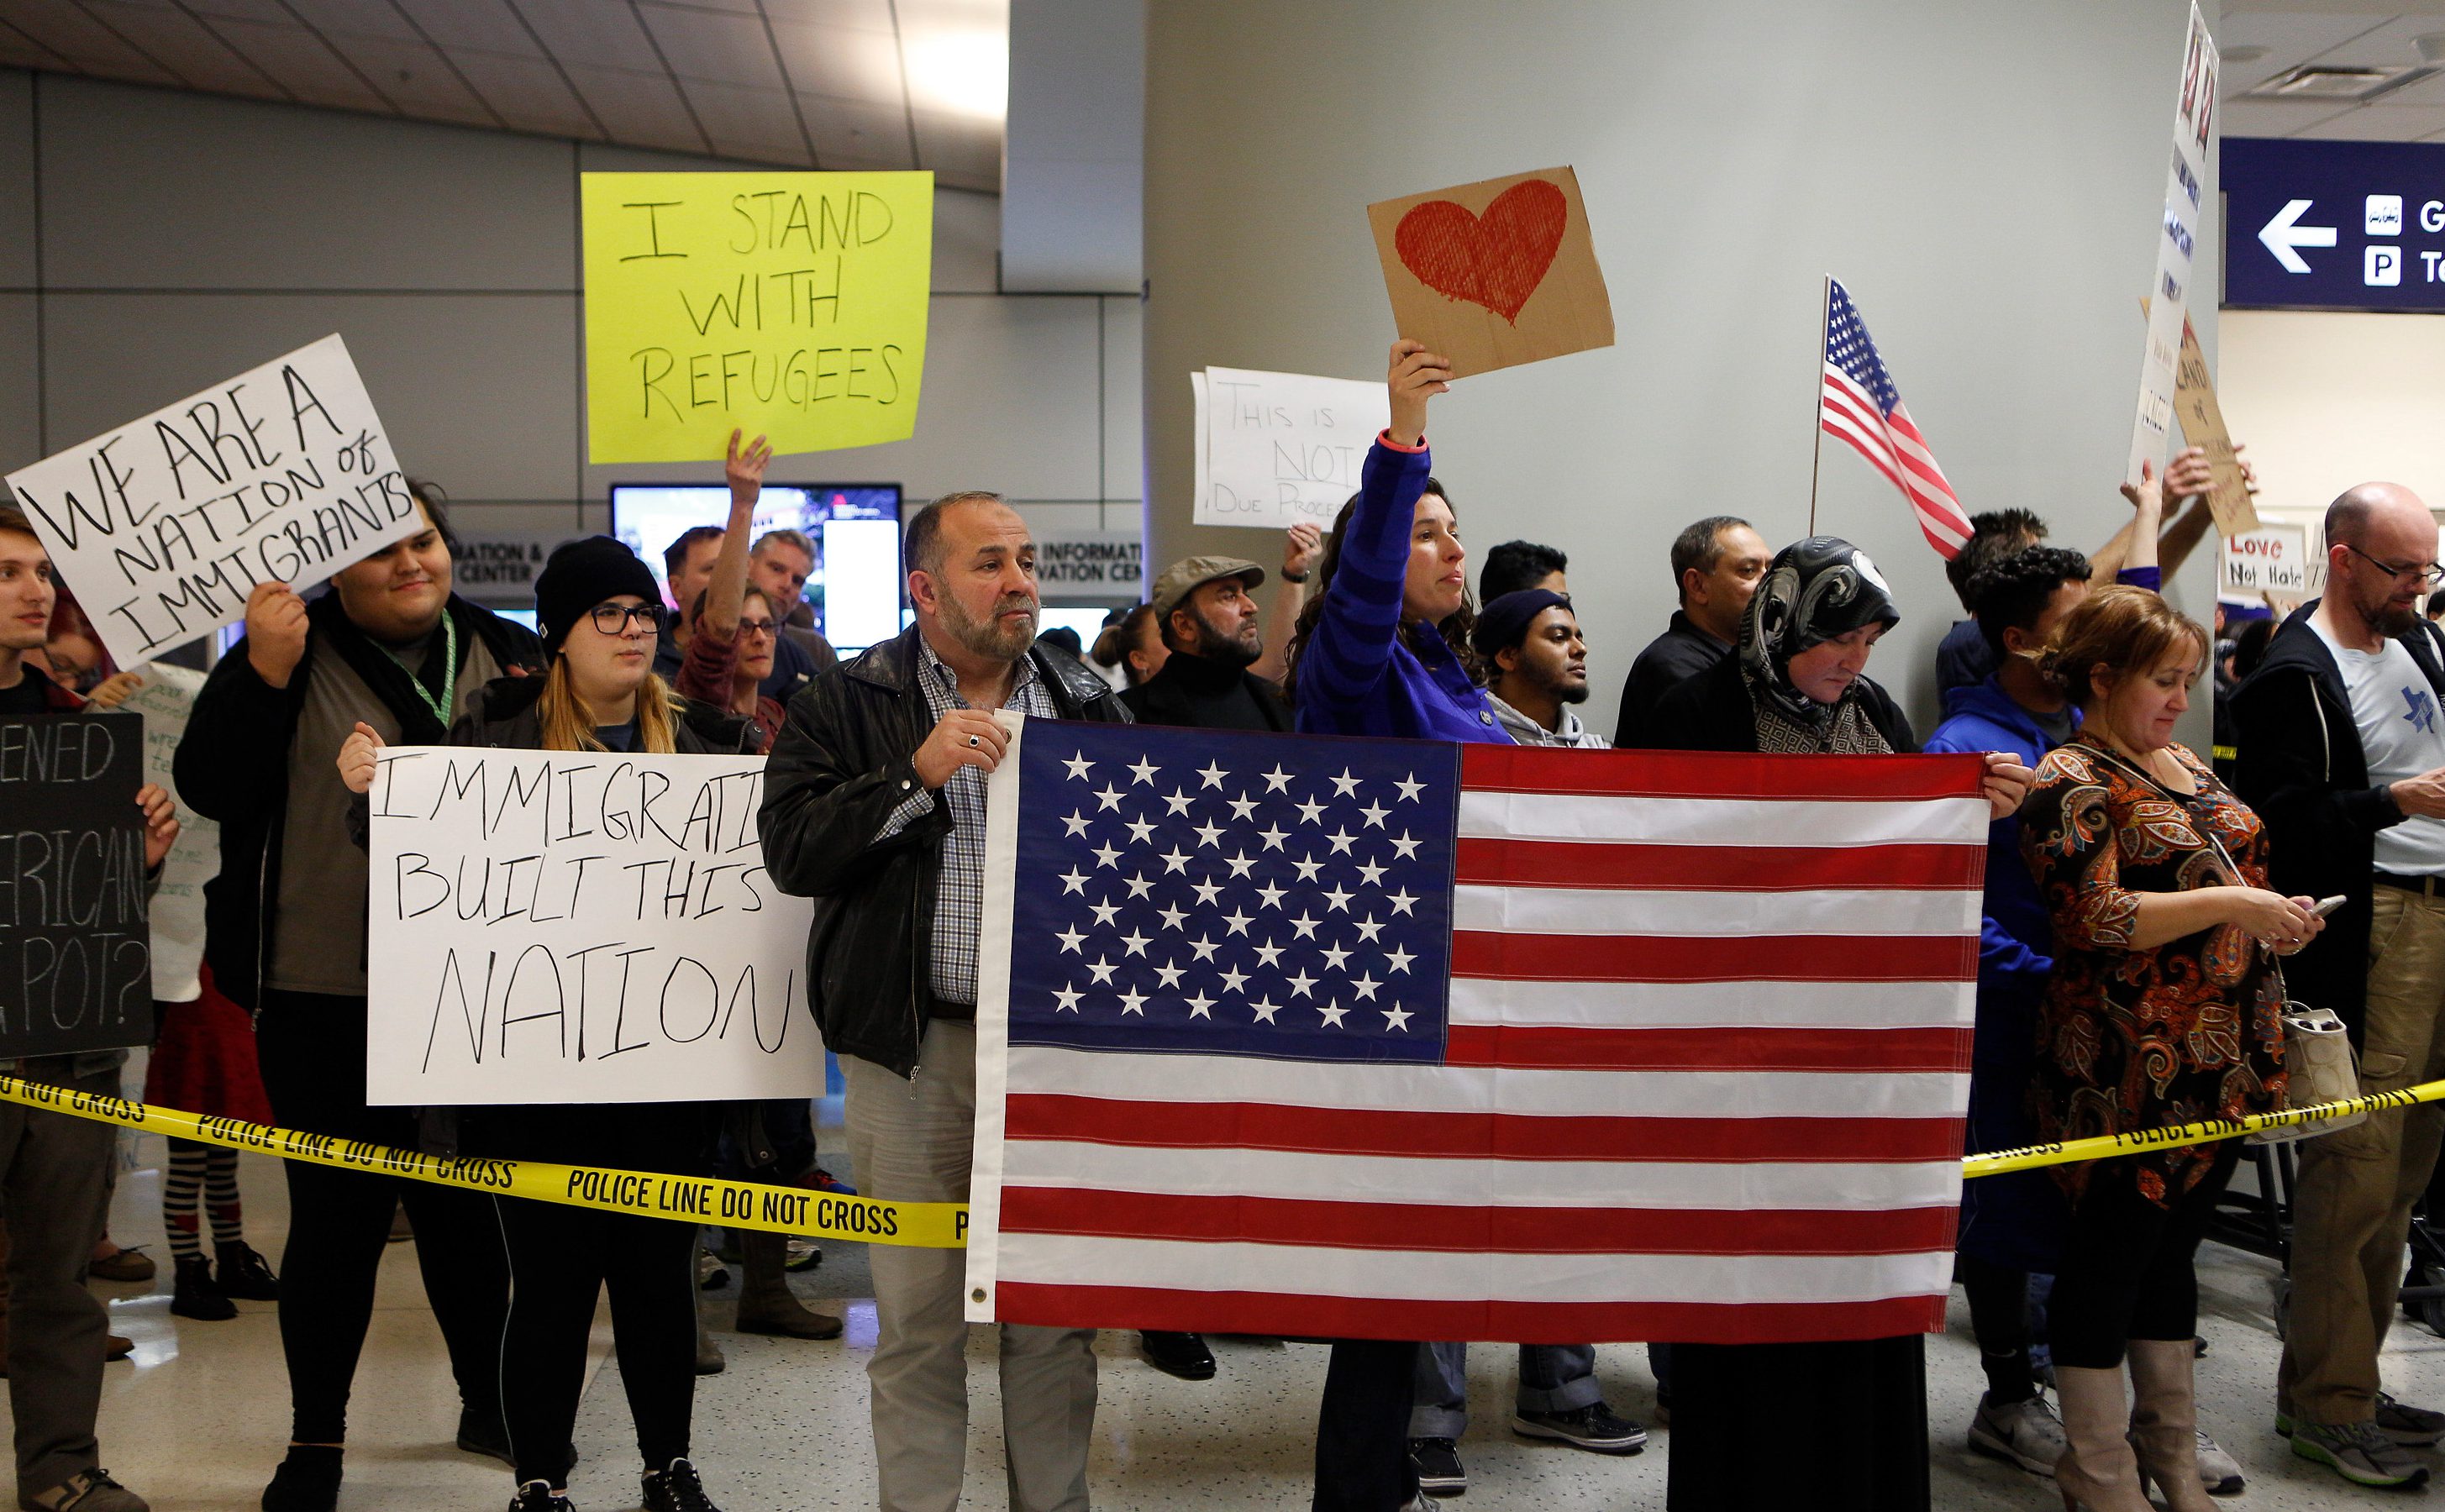 Protesters gather to denounce President Donald Trump's executive order that bans certain immigration, at Dallas-Fort Worth International Airport on January 28, 2017 in Dallas, Texas. (Getty)